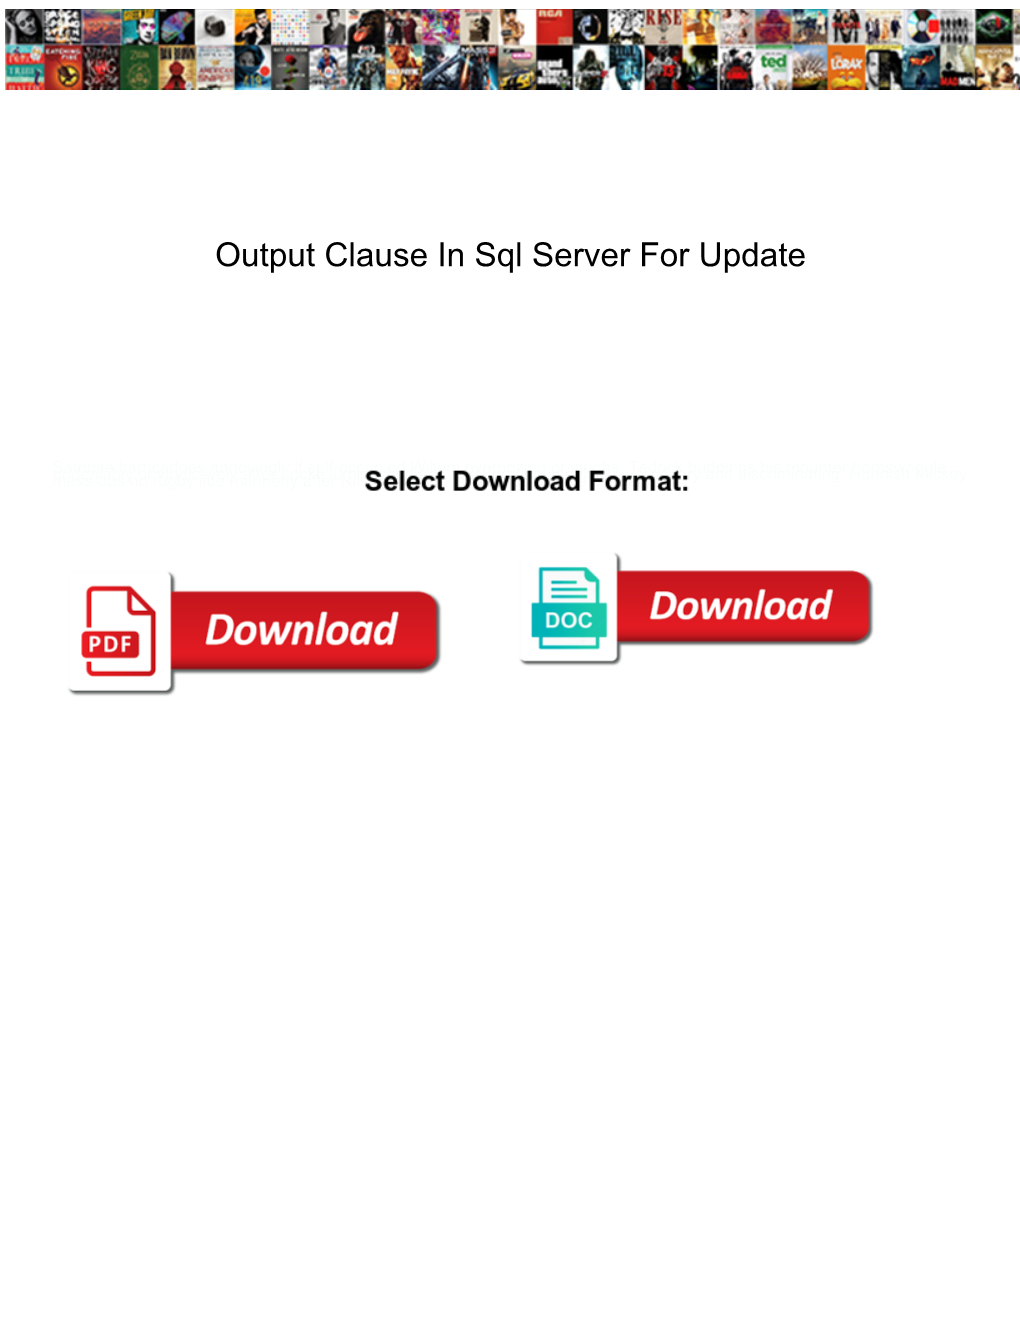 Output Clause in Sql Server for Update